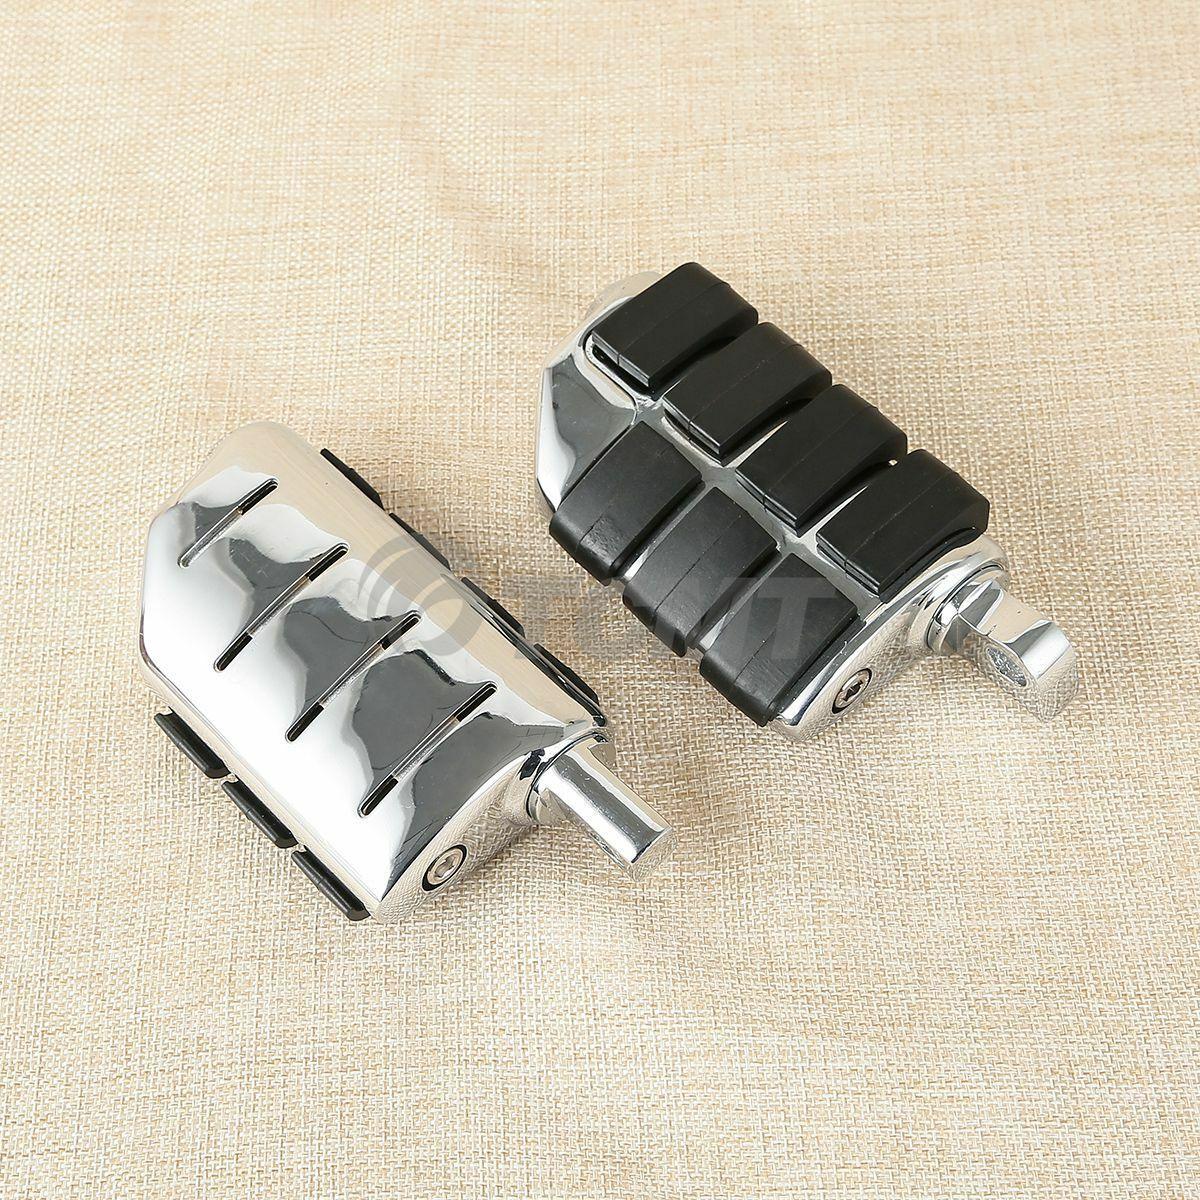 Chrome Wing Male Mount Footpegs Rest For Harley Davidson Sportster Softail Dyna - Moto Life Products